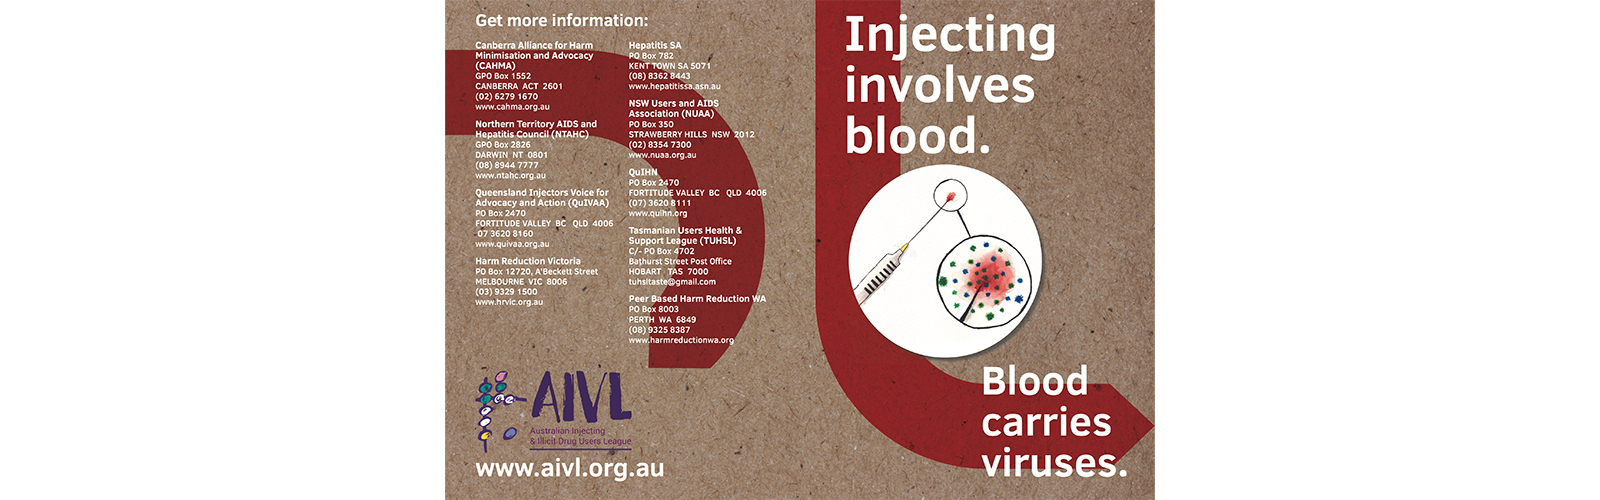 Featured image for “Injecting Involves Blood – Be ‘Blood Aware’”